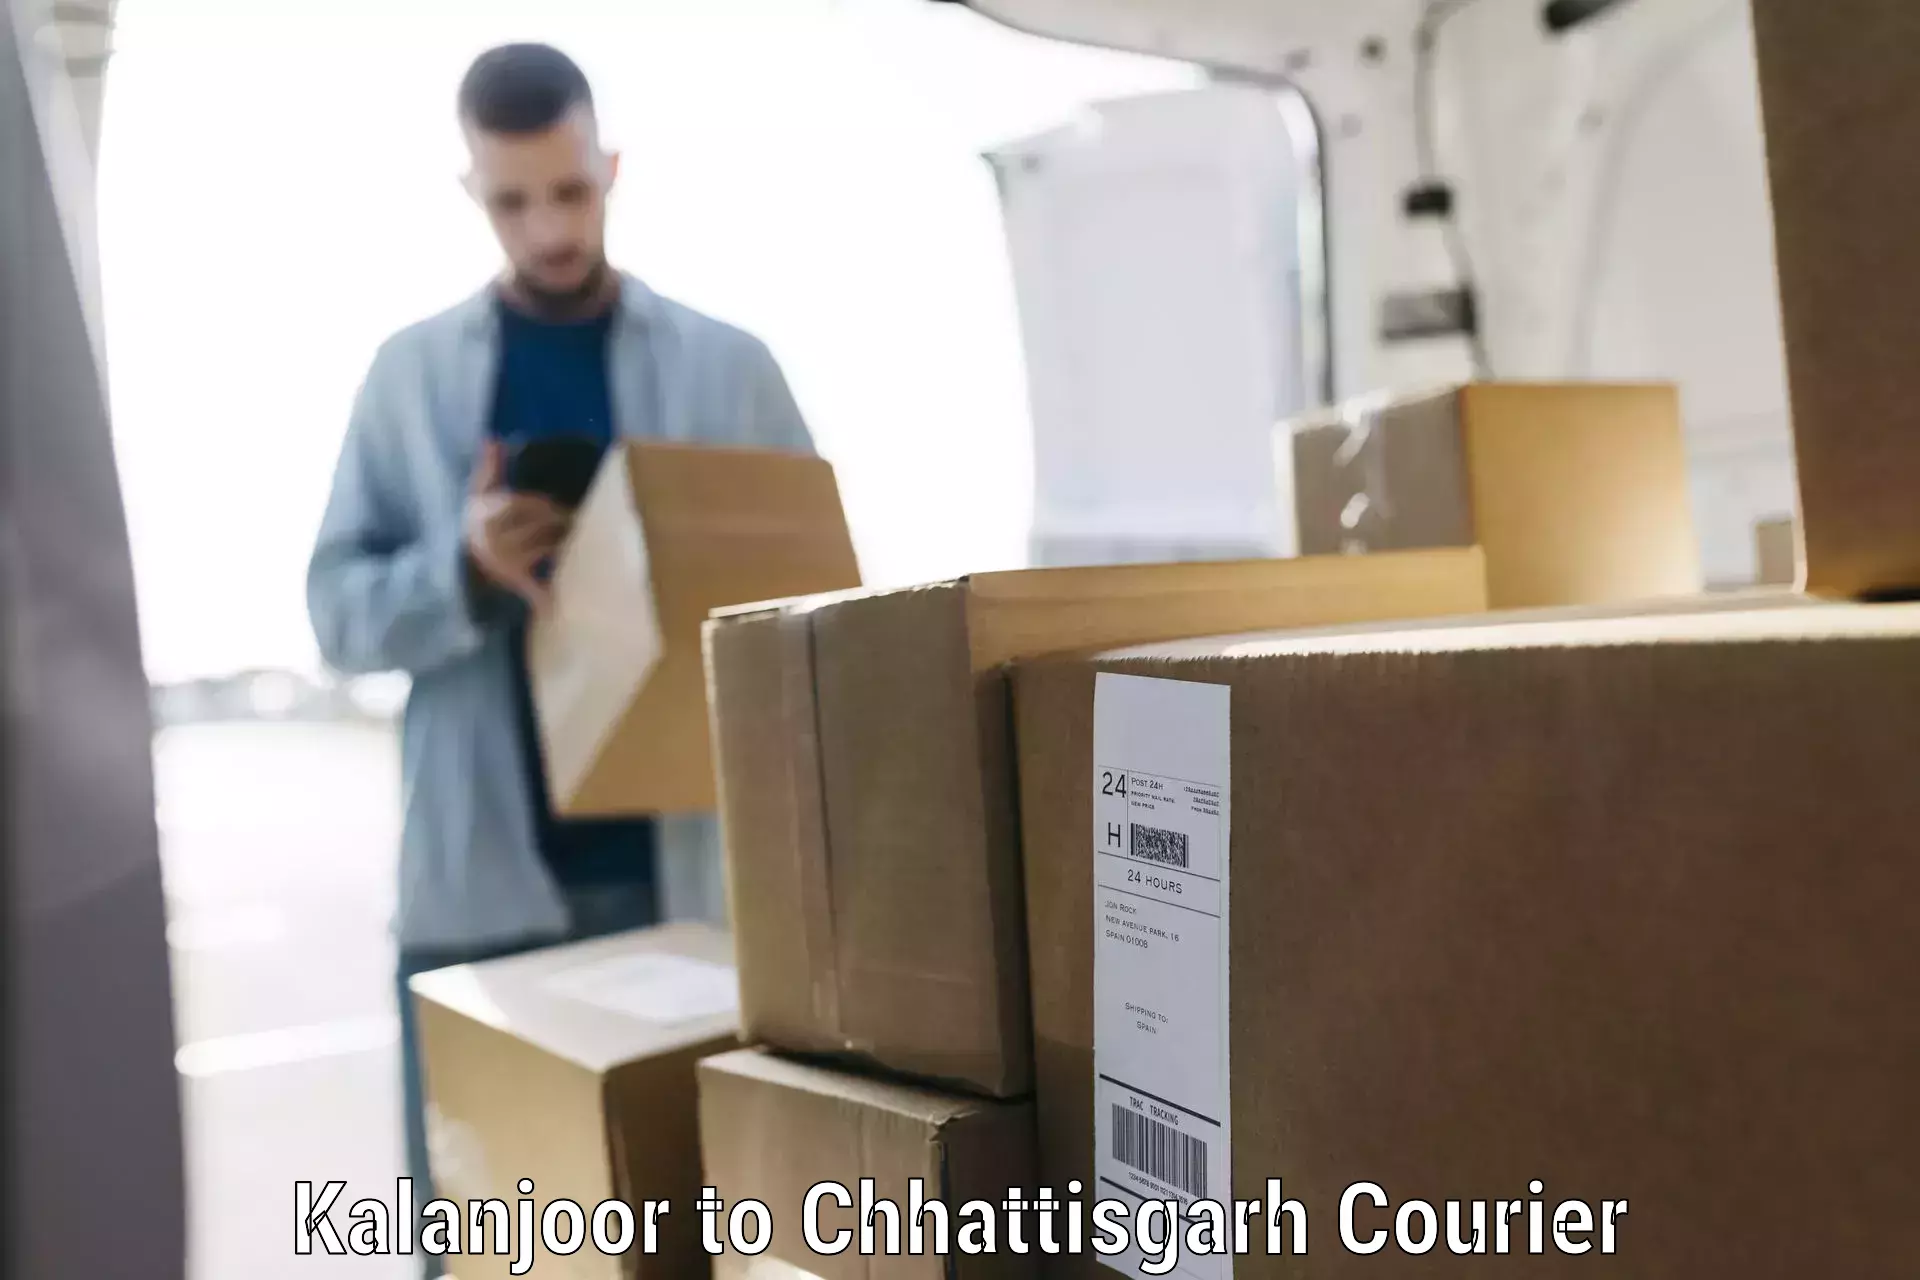 Luggage delivery system Kalanjoor to Chhattisgarh